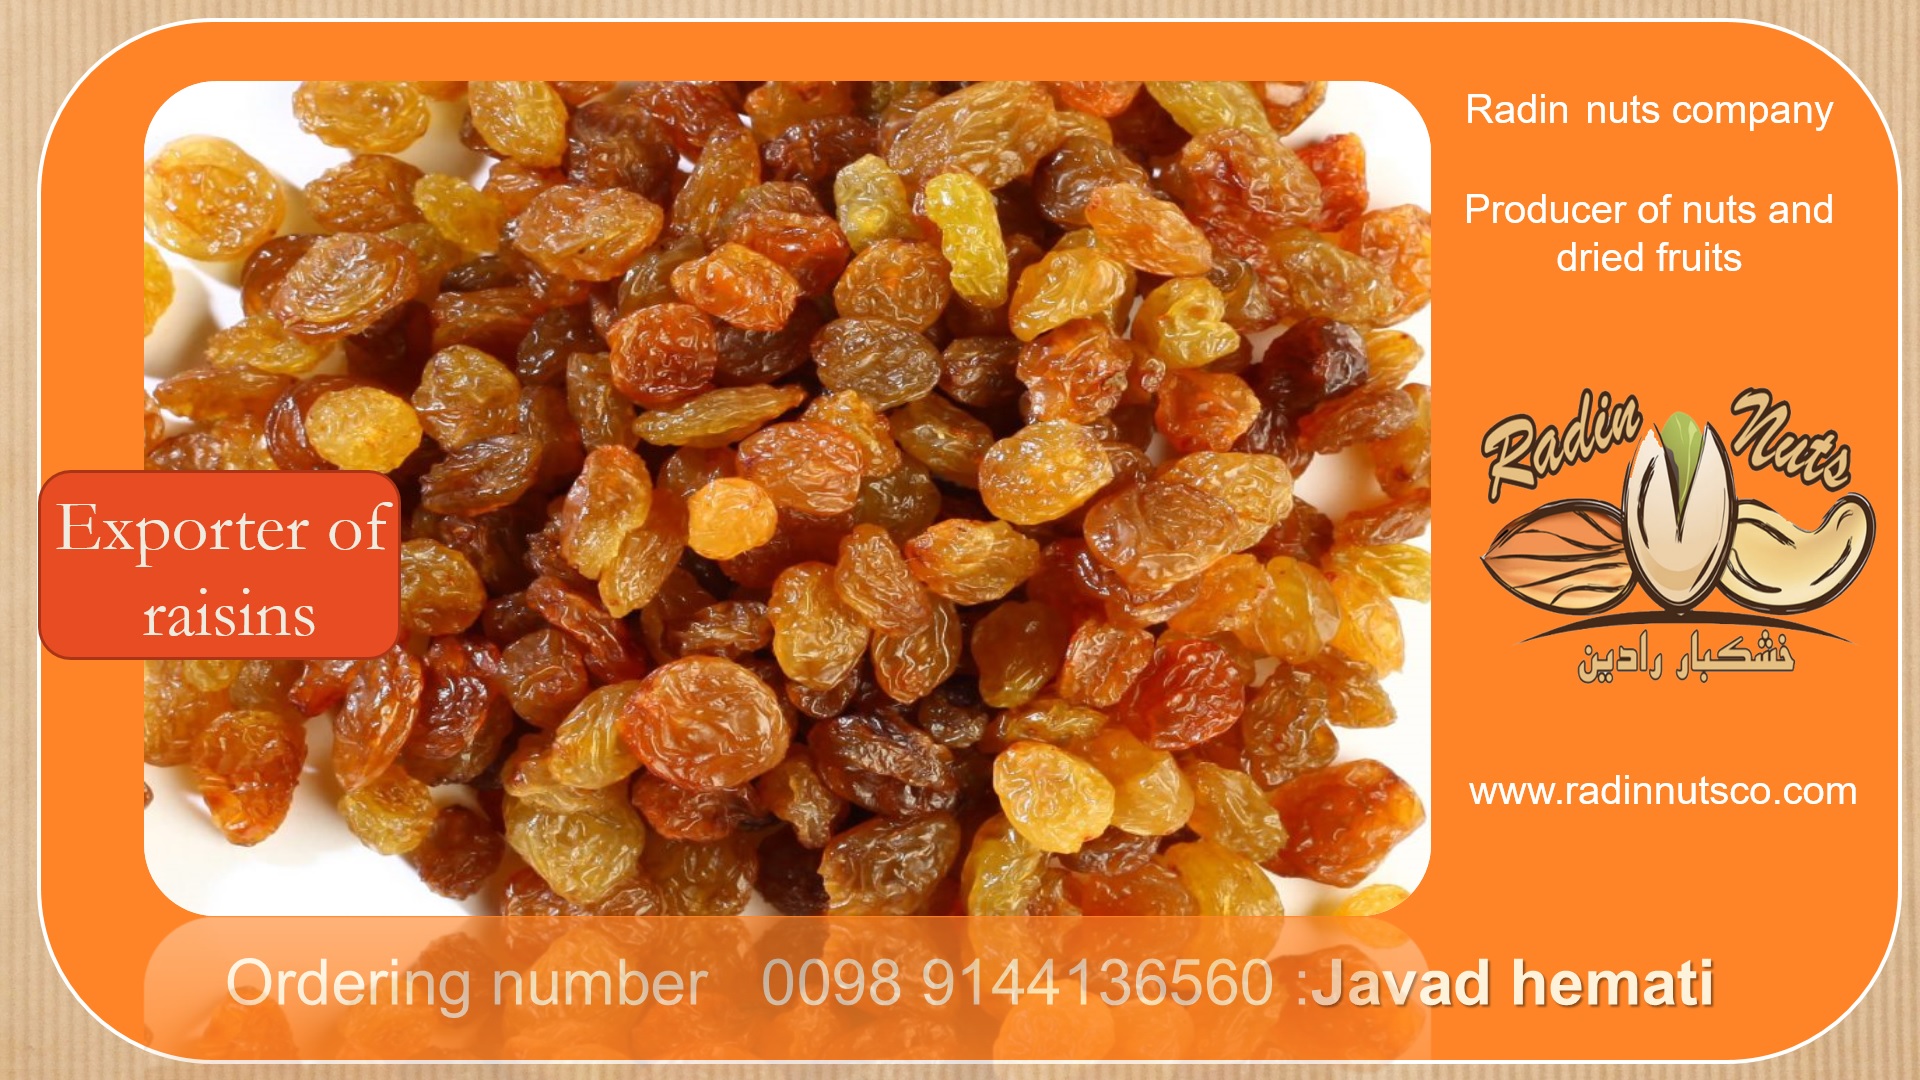 Exporter of raisins to all parts of the world